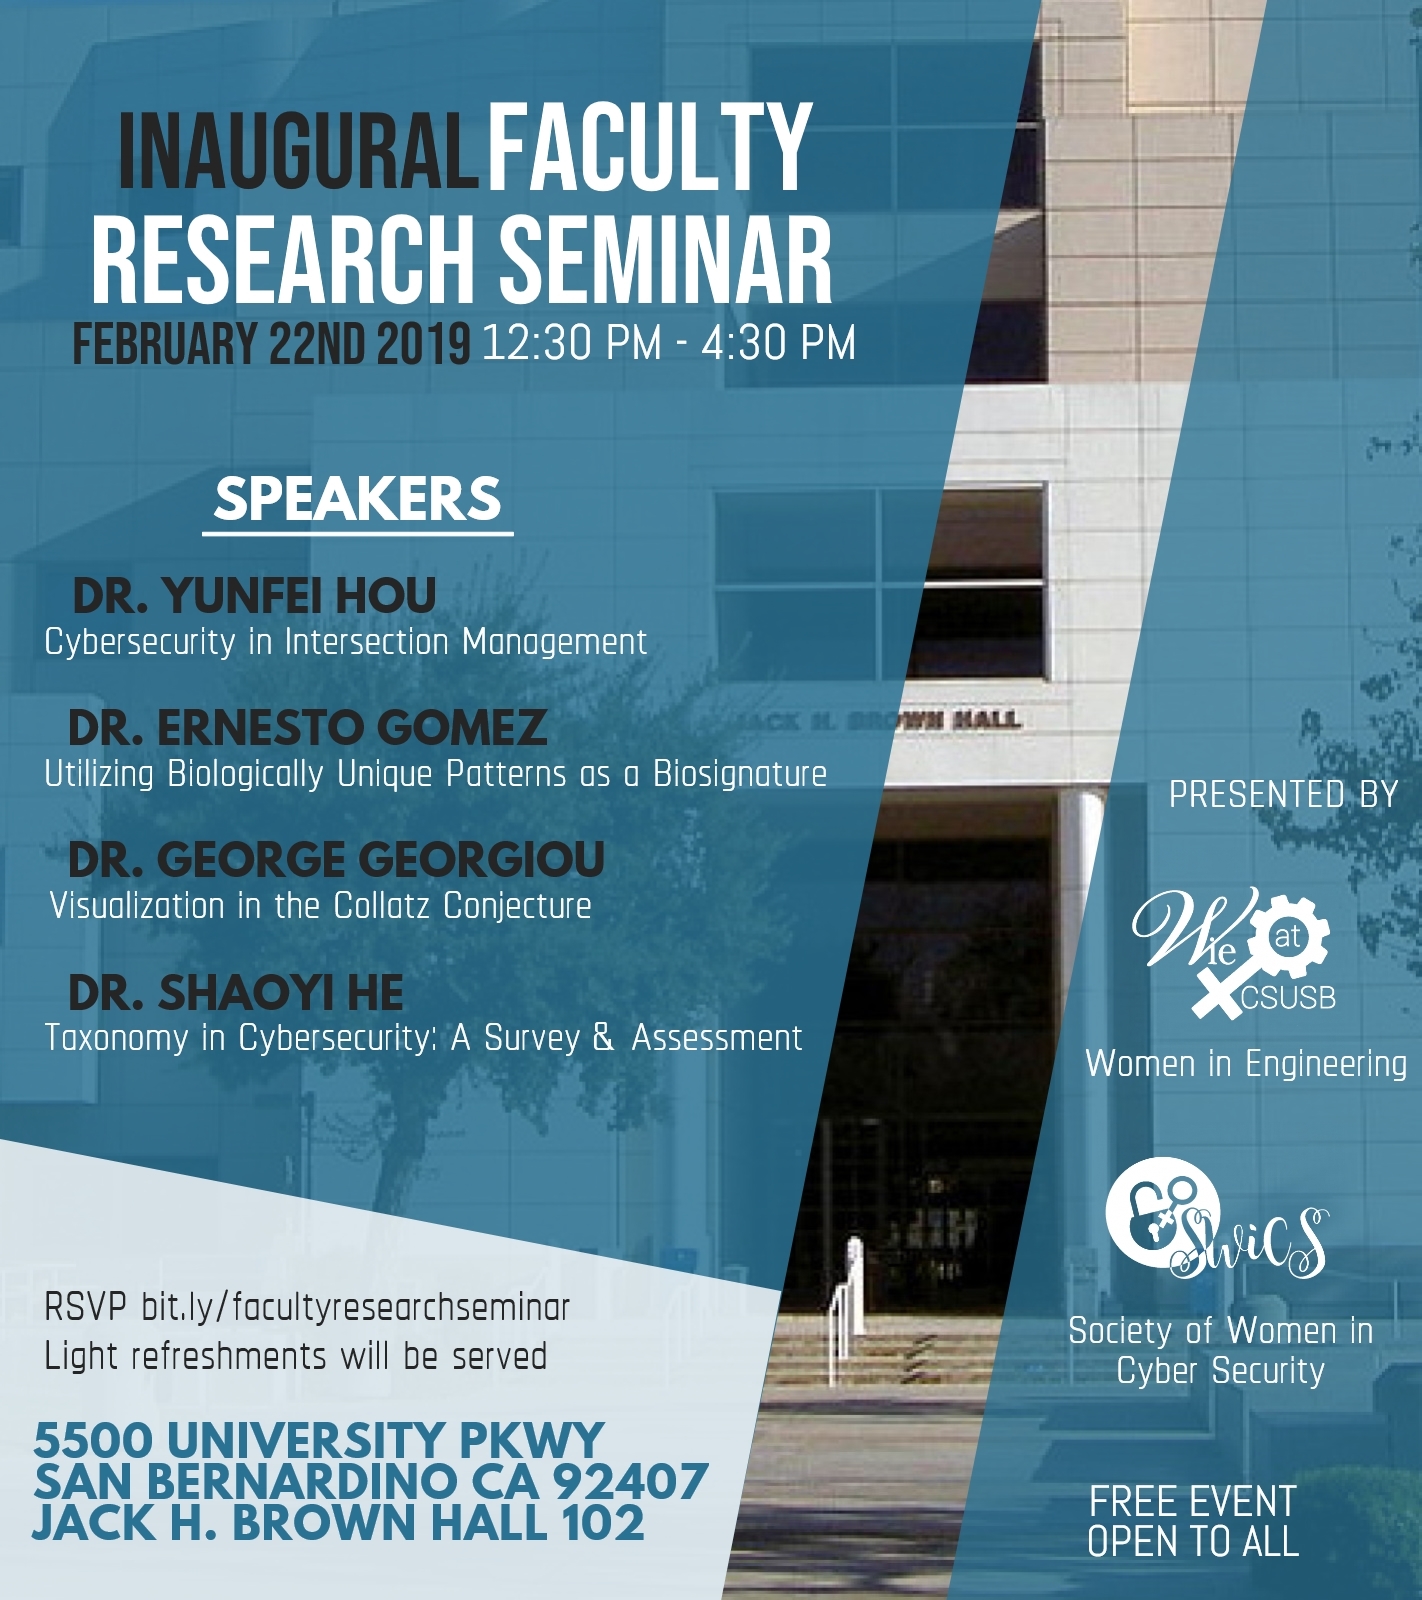 Cal State San Bernardino will present the Inaugural Faculty Research Seminar on Friday, Feb. 22, at Jack H. Brown Hall, room 102, from 12:30-4:30 p.m. 